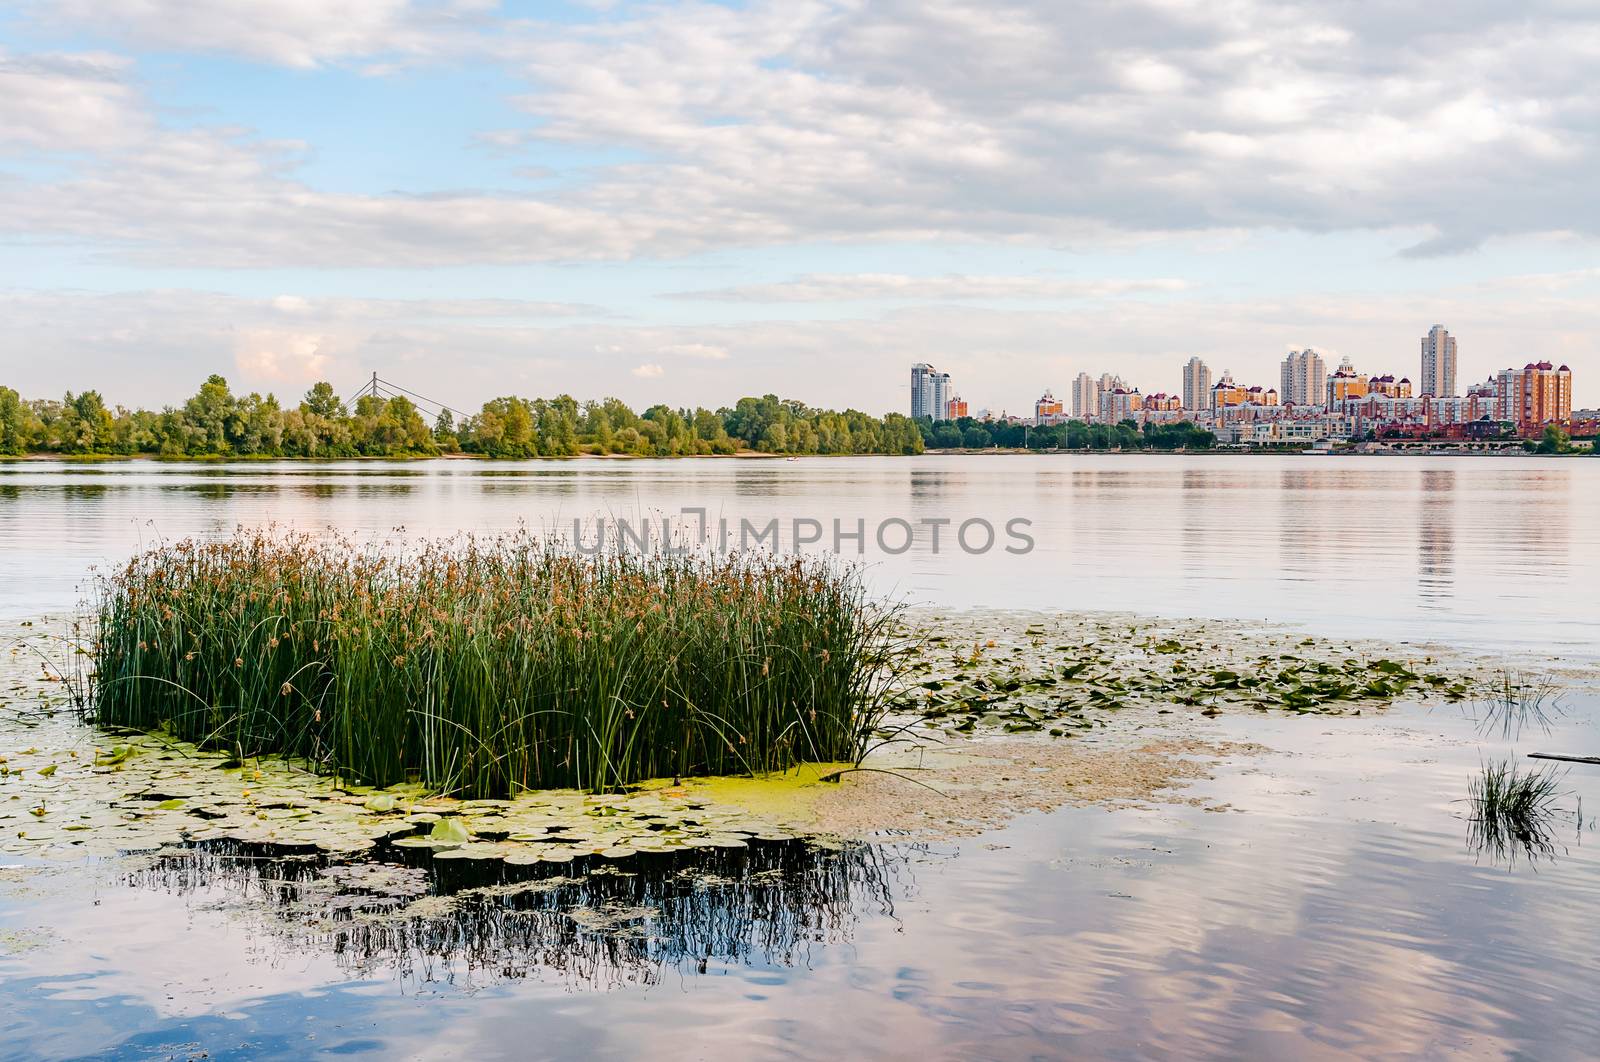 Scirpus plants and yellow waterlily in the Dnieper river in Kiev, Ukraine, at evening. Building skyline appears in the distance.